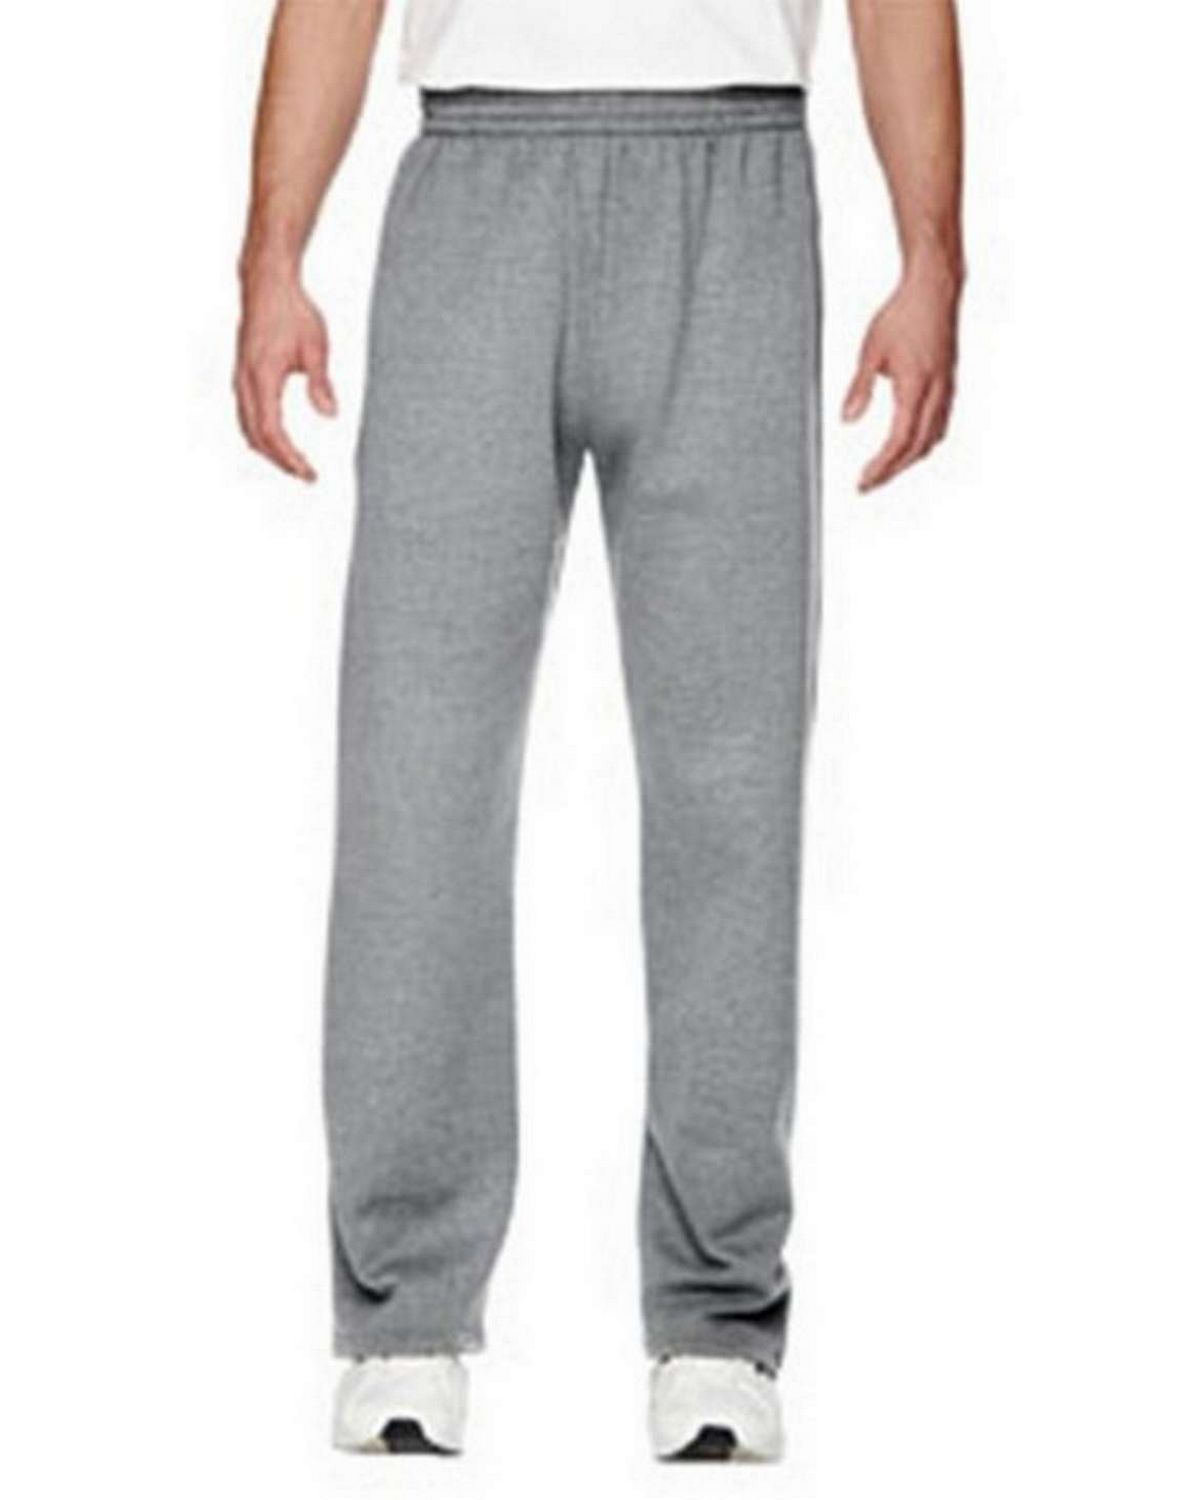 white fruit of the loom sweatpants